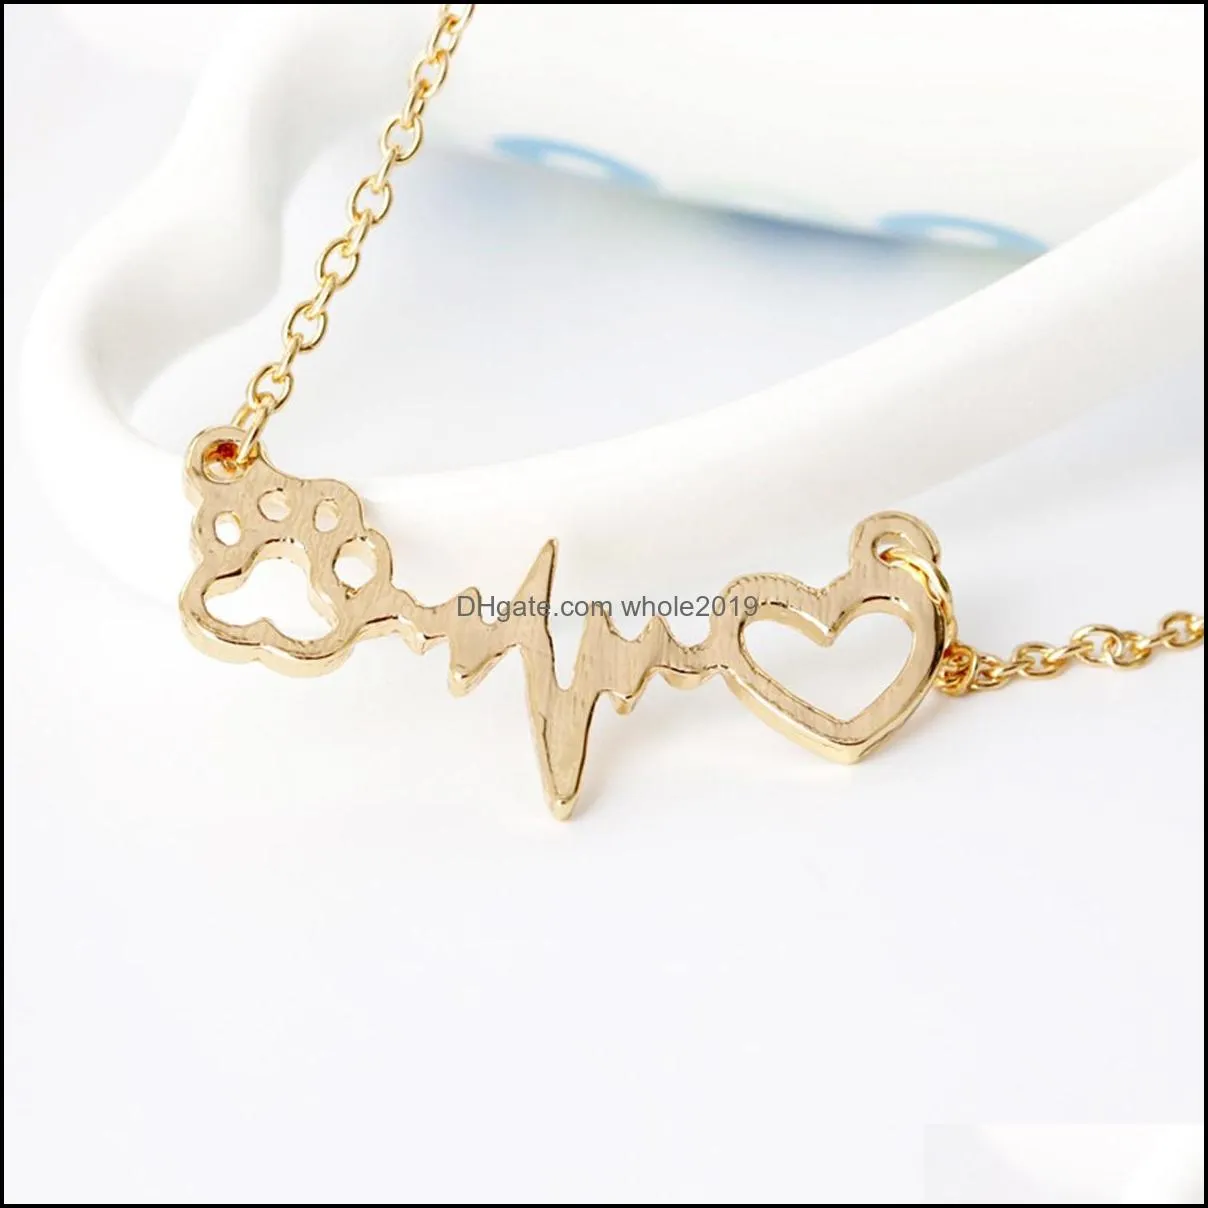 Love Bear Paw Dog Footprint ECG Heart Beat Necklace Women Bling Clavicle Chain Jewelry Gift